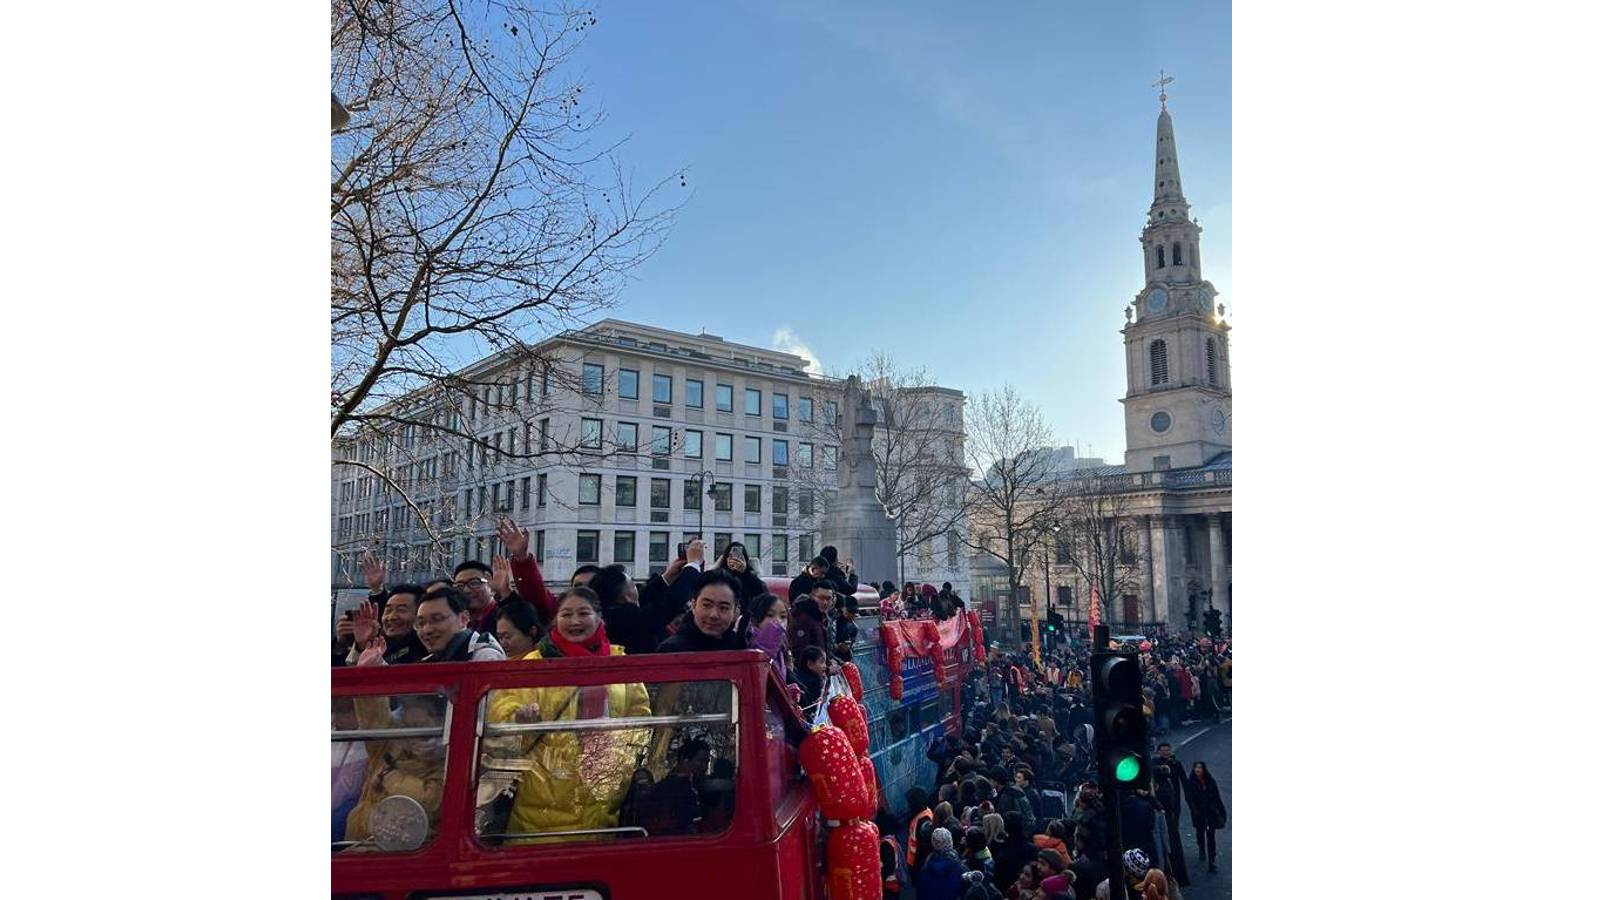 Some revelers even boarded traditional London buses that were part of the parade. /LCCA